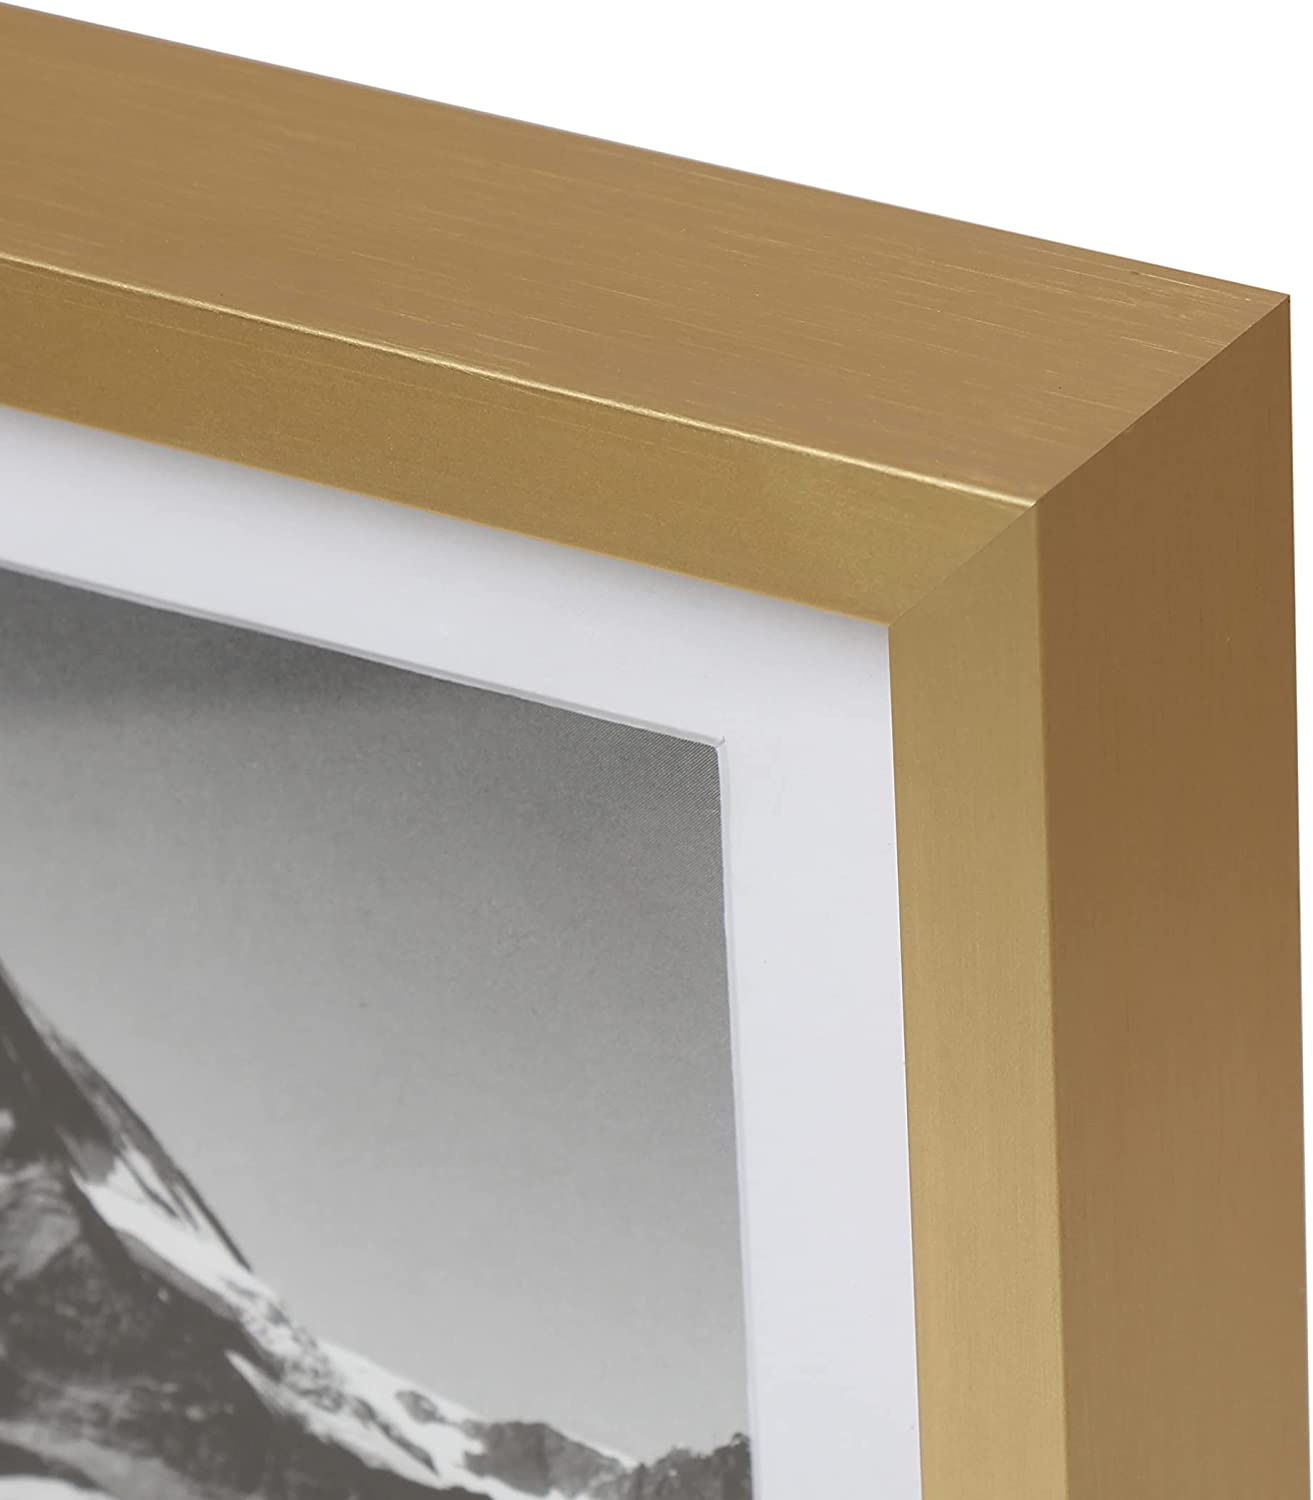 11" x 14" Deluxe Brass Gold Aluminum Contemporary Diploma Picture Frame, 8.5" x 11" Matted